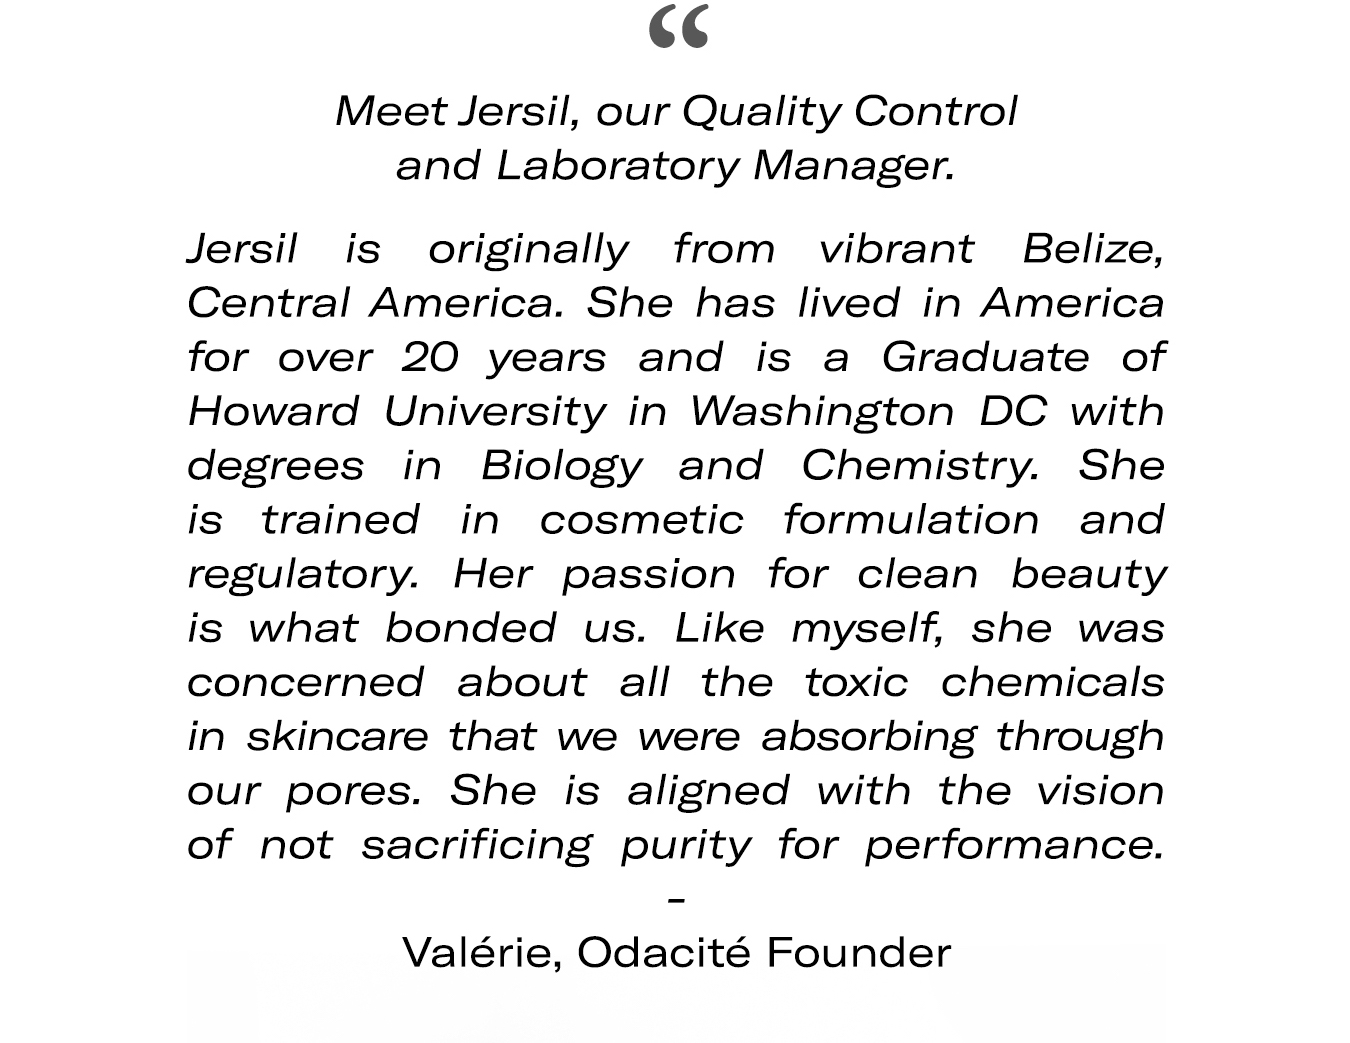 Read More from Odacité''s Lab Manager, Jersil